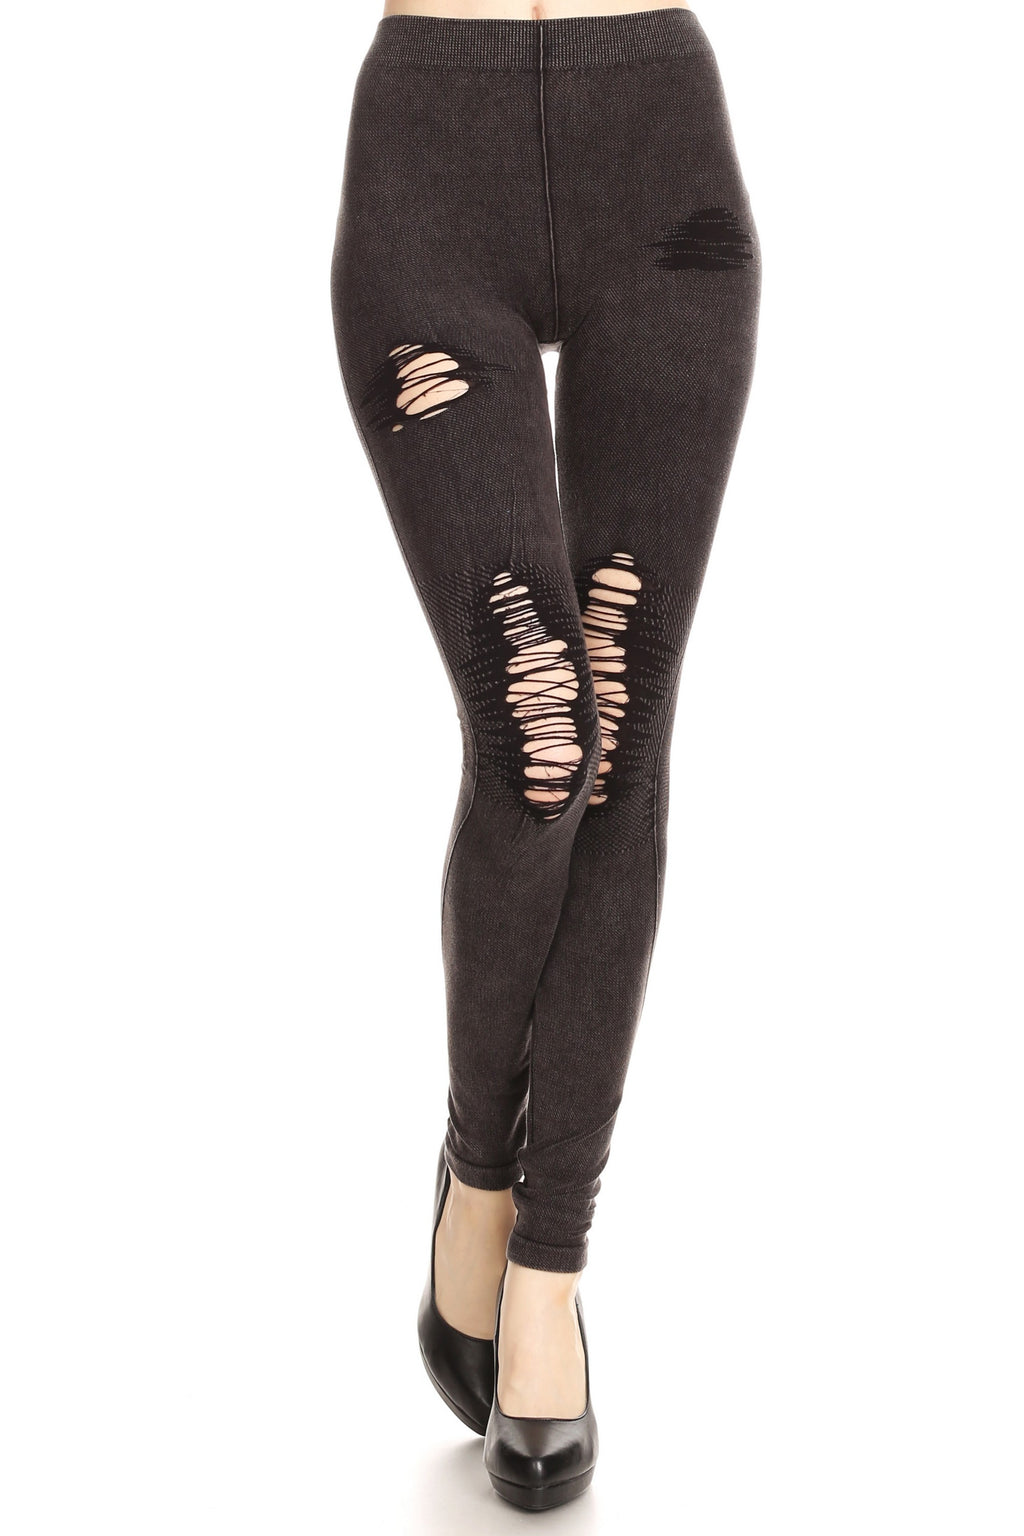 Distressed, But Well Dressed Denim Jeggings ICONOFLASH